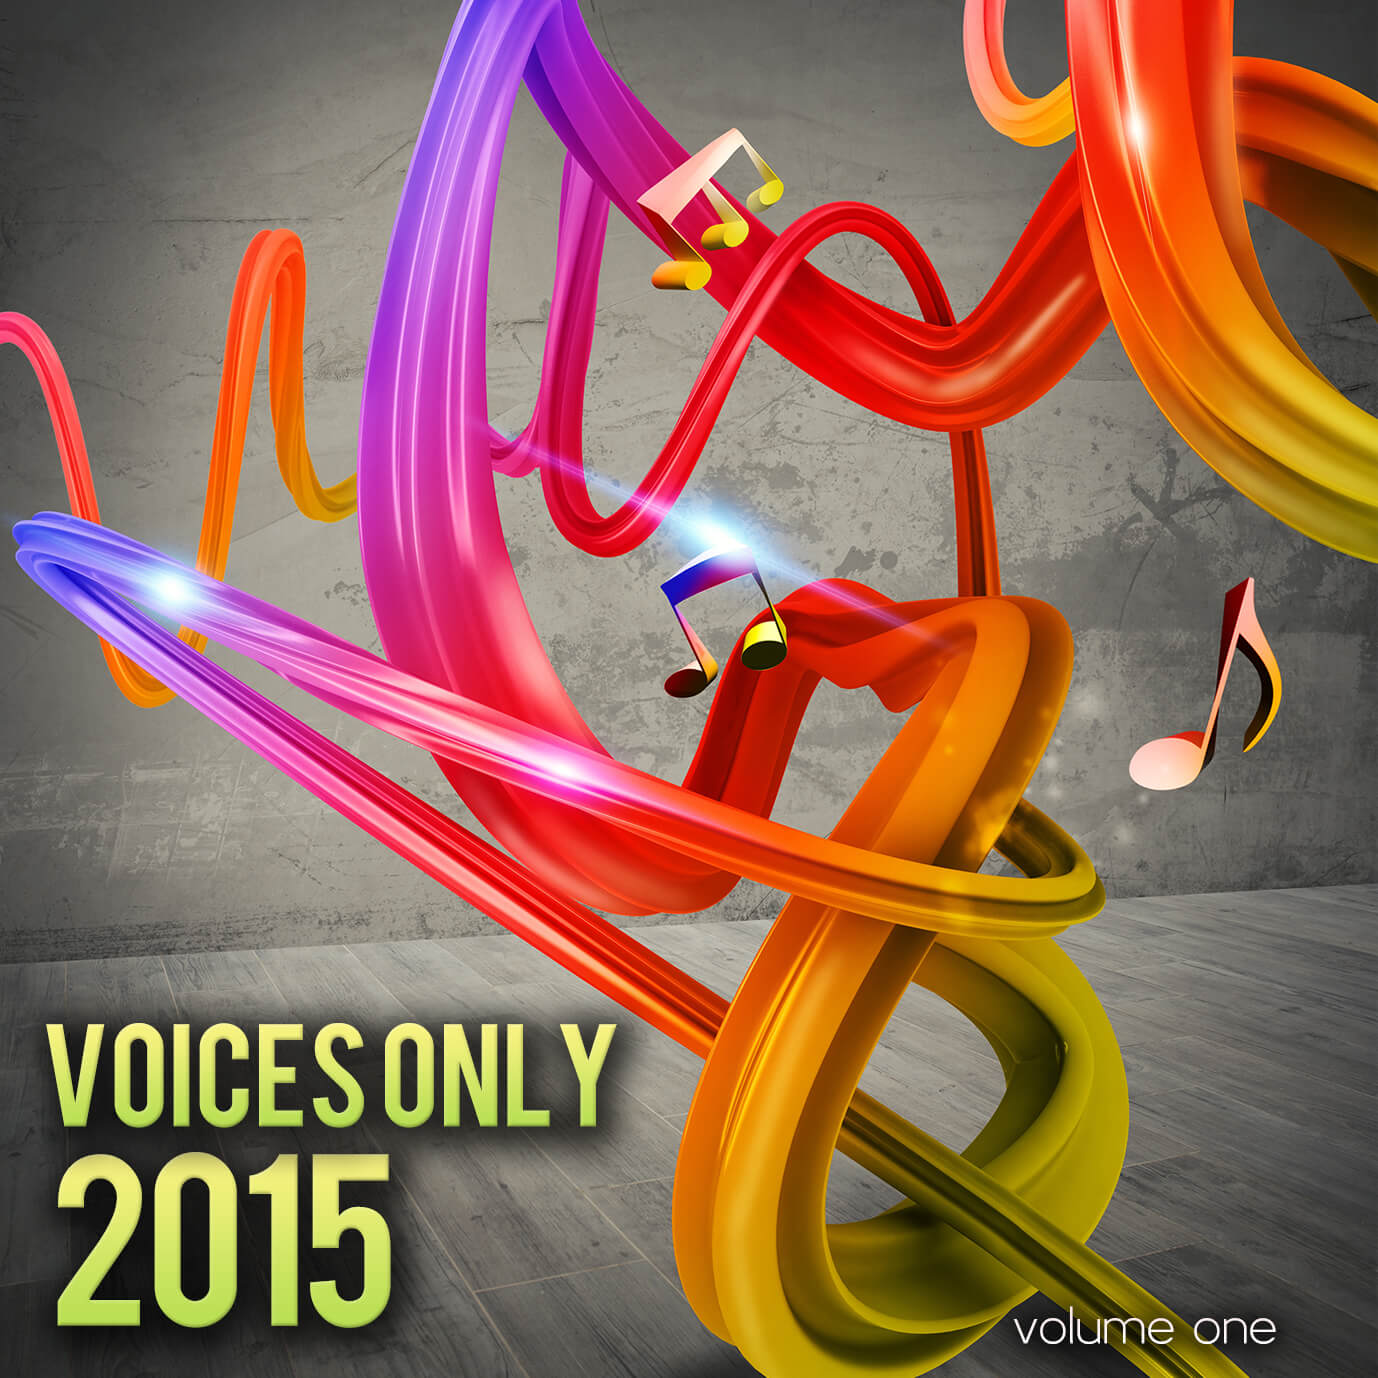 Voices Only 2015